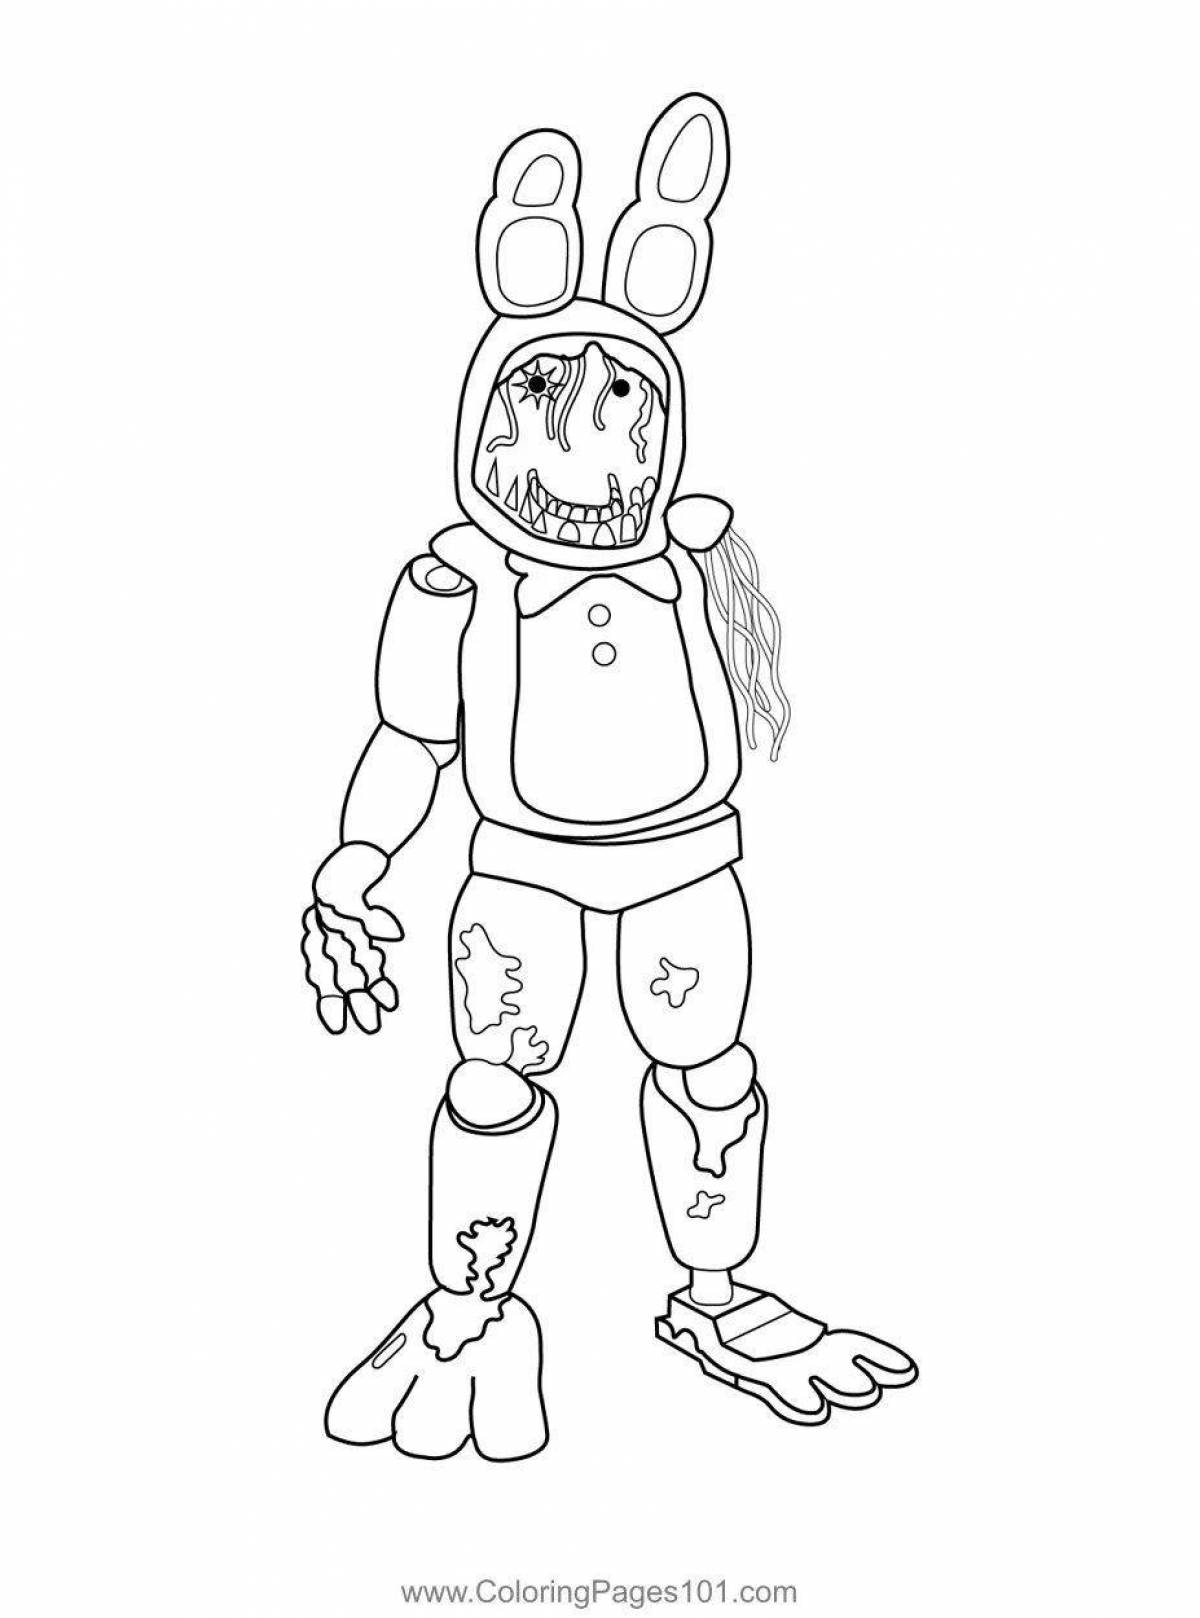 Charming bonnie from fnaf 1 coloring